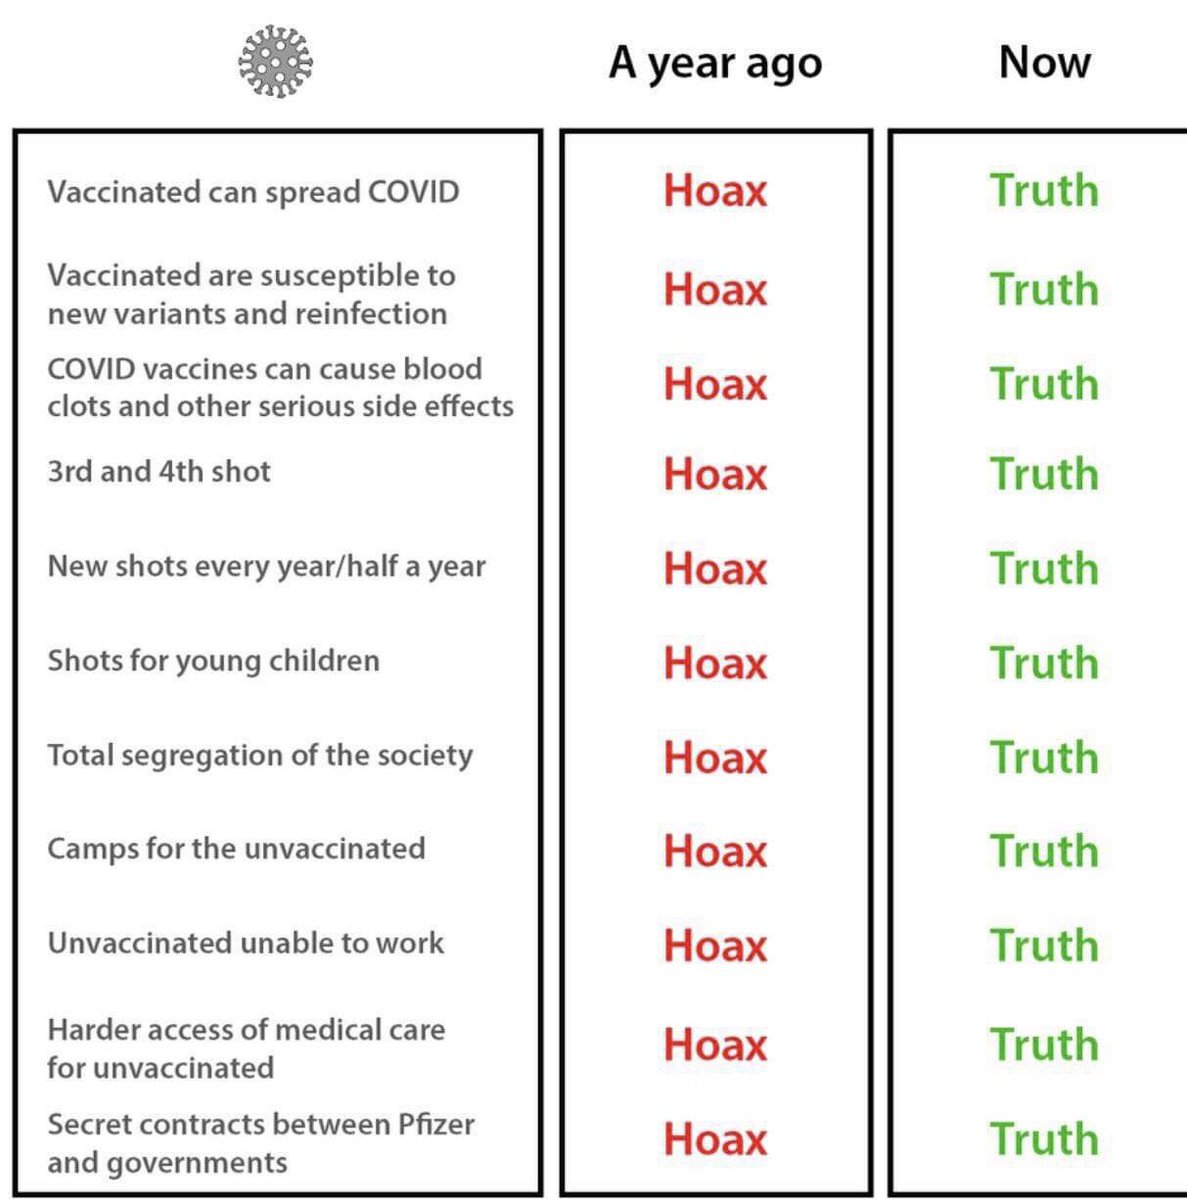 What’s the difference between a hoax & the truth? About 6-12 months